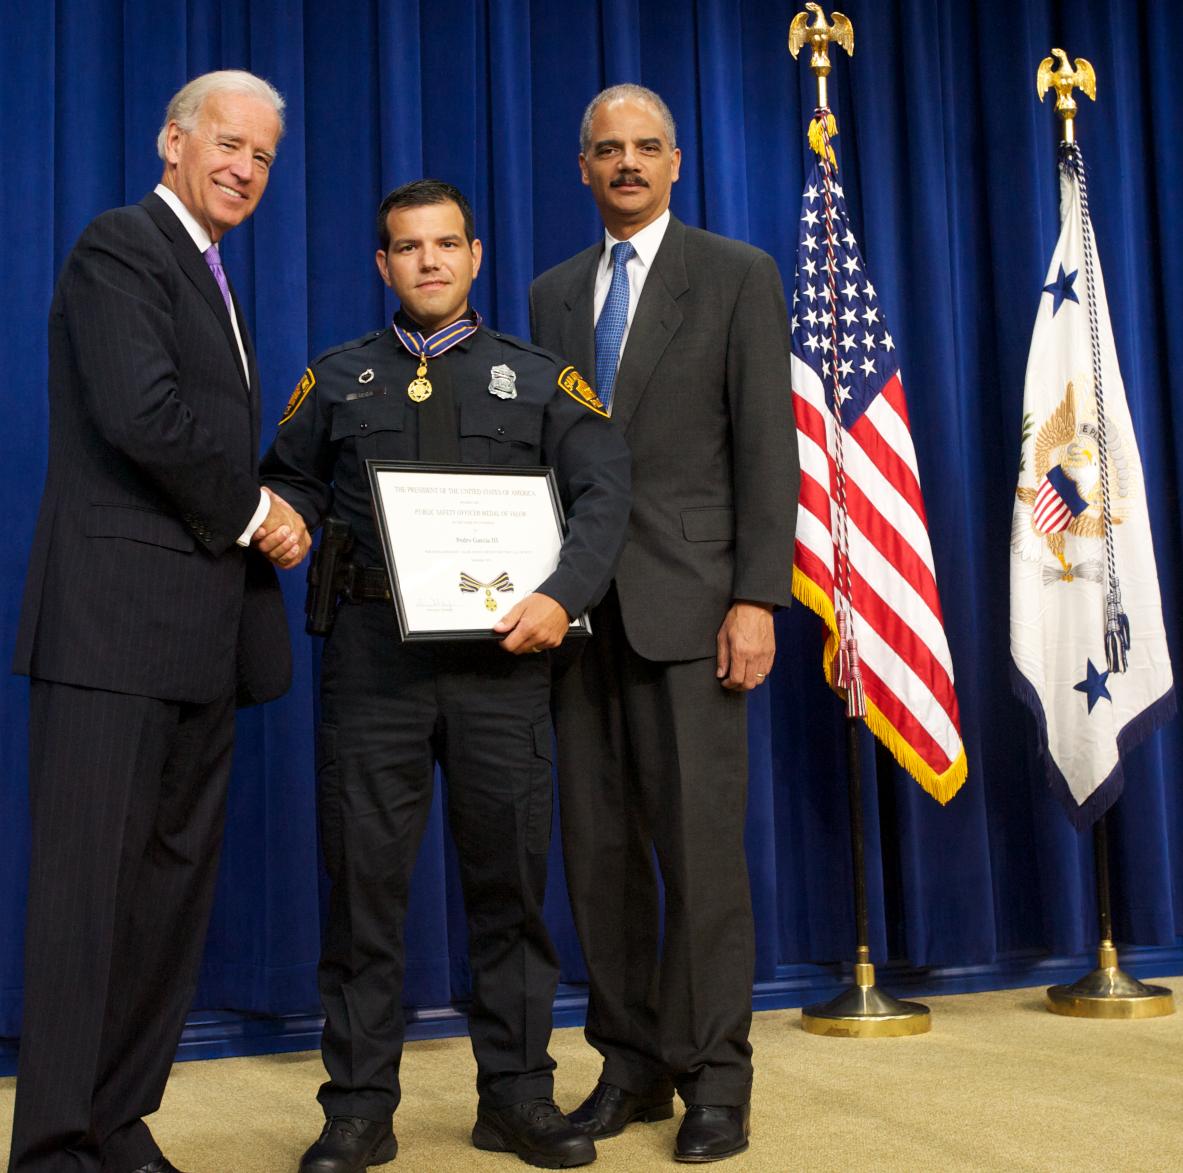 Three men standing in front of flags on a stage and facing the camera. The man in the middle is wearing an officer uniform and holding a Medal of Valor award plaque. 